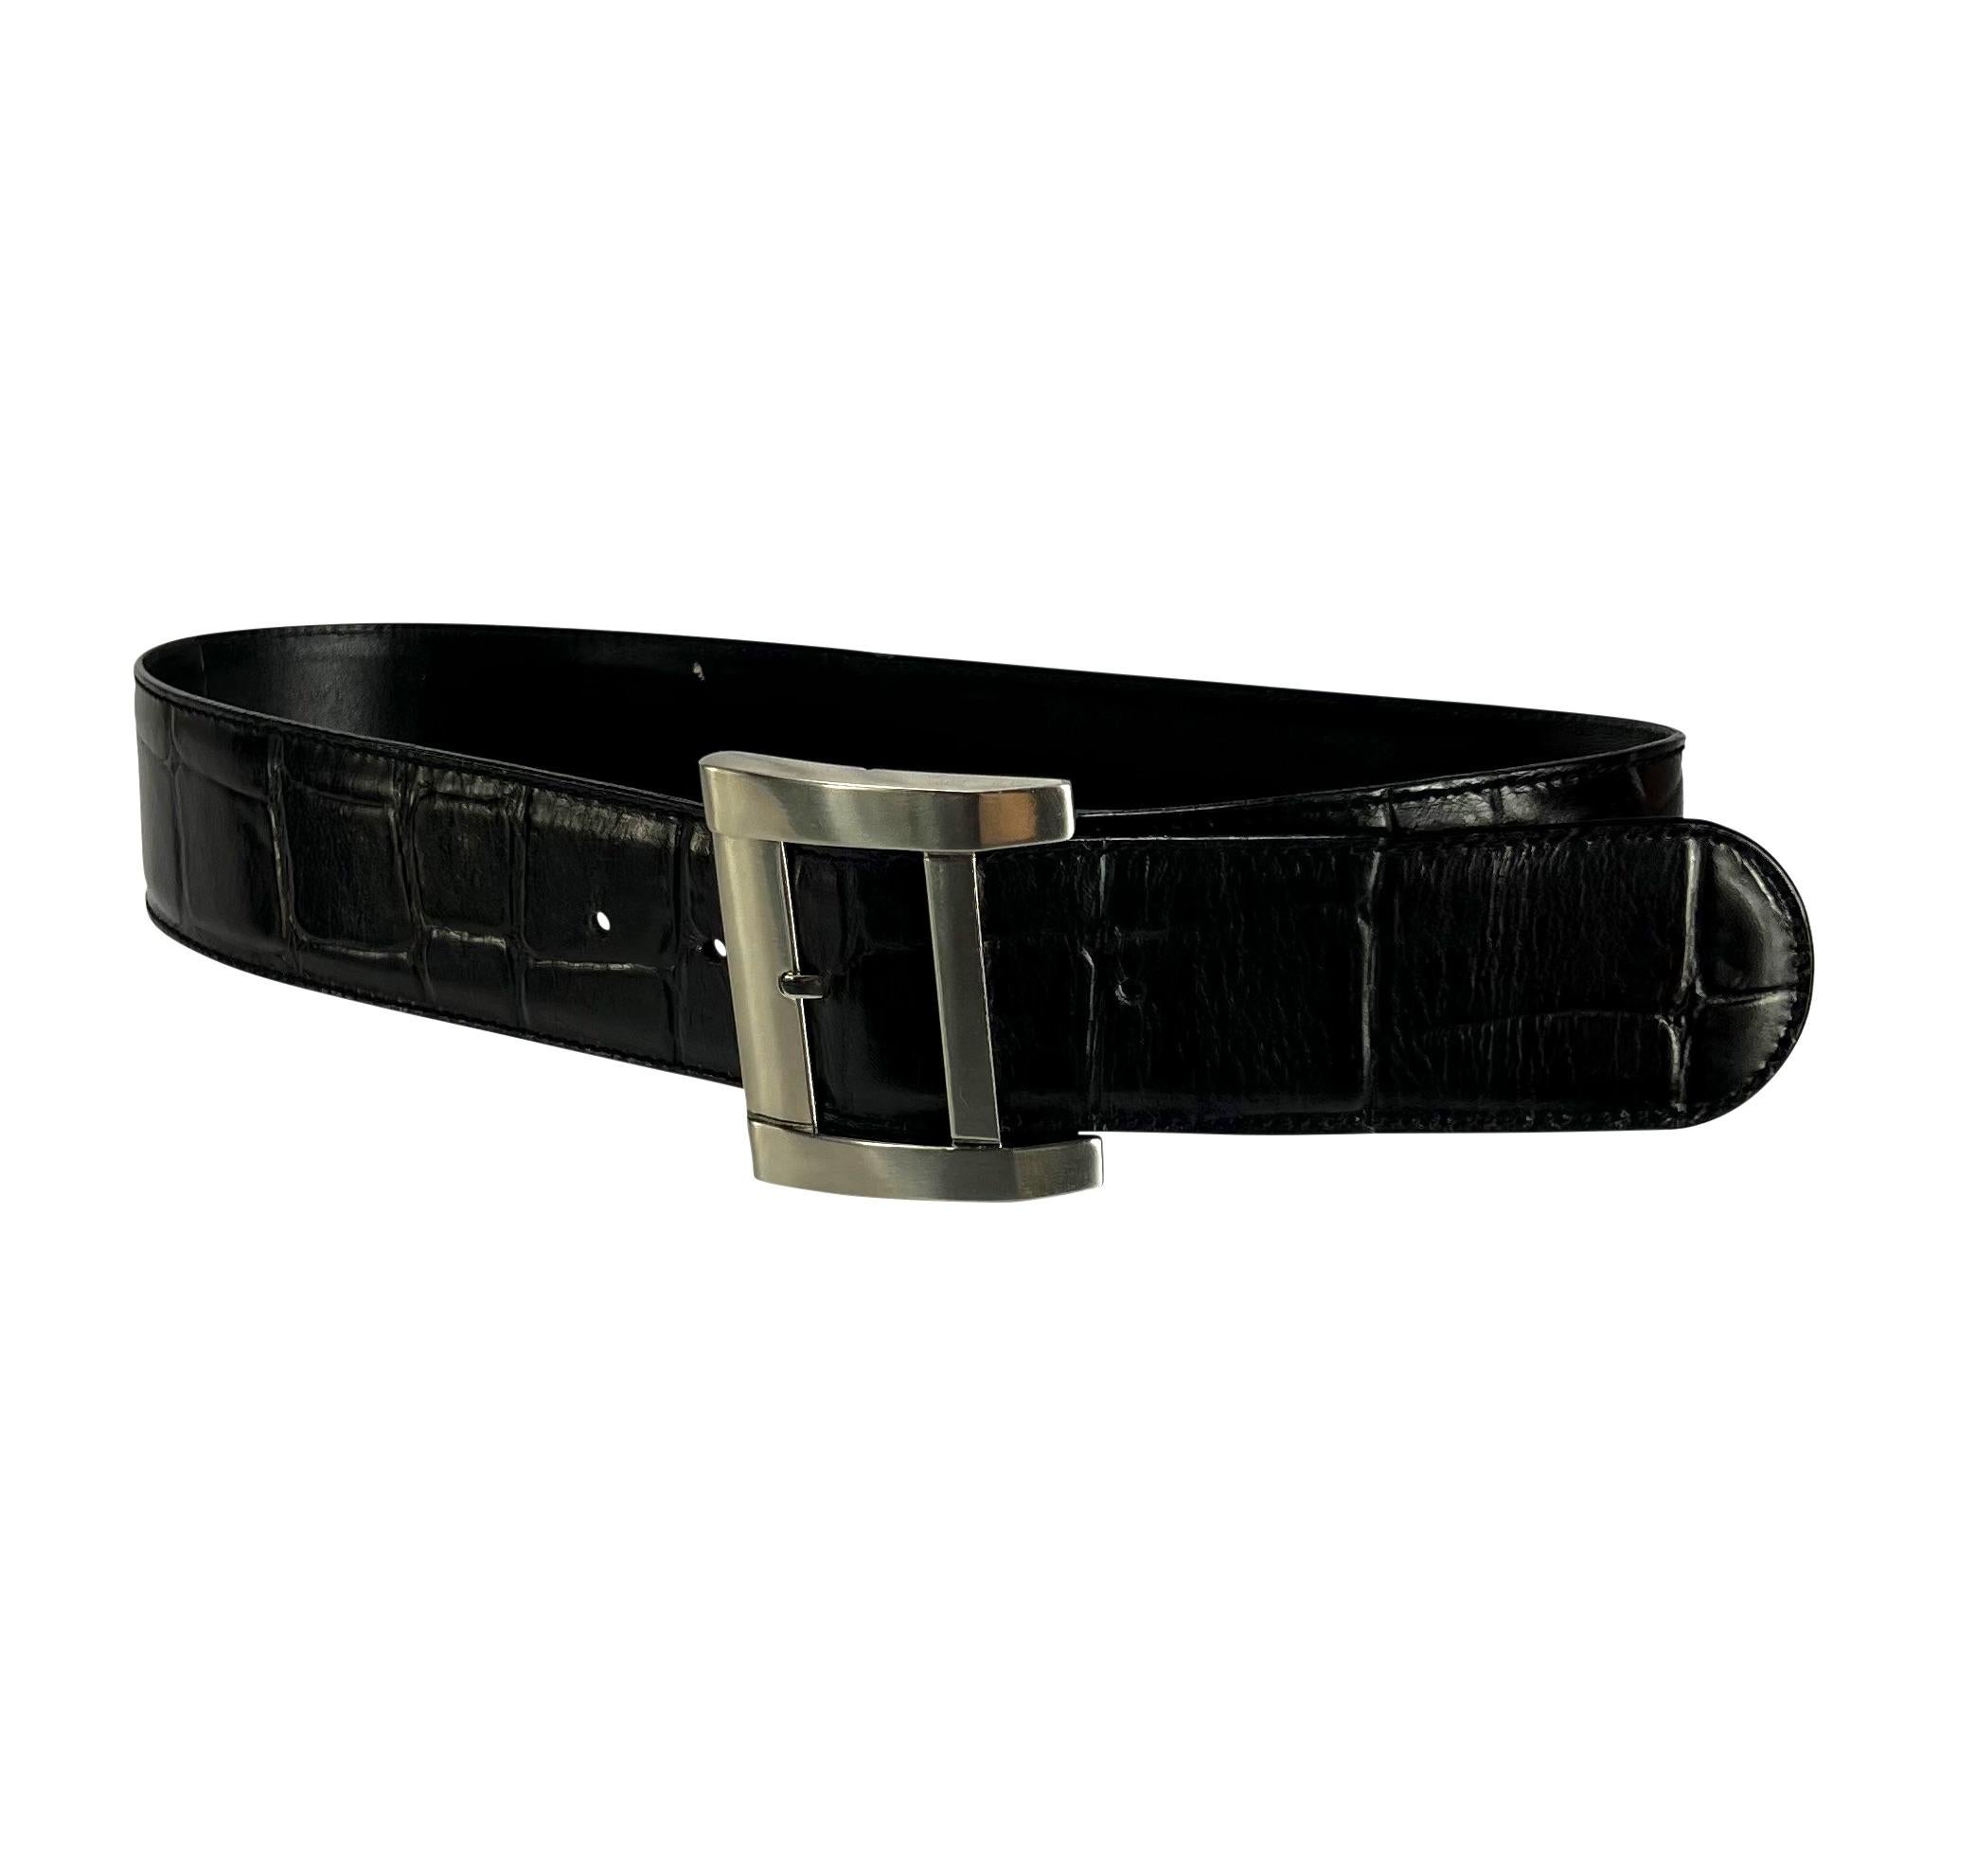 Presenting a fabulous black leather crocodile embossed Gianni Versace belt, designed by Gianni Versace. From the late 1980s, this wide belt is made complete with a large angular silver-tone buckle.

Approximate Measurements: 
Length: 35.75